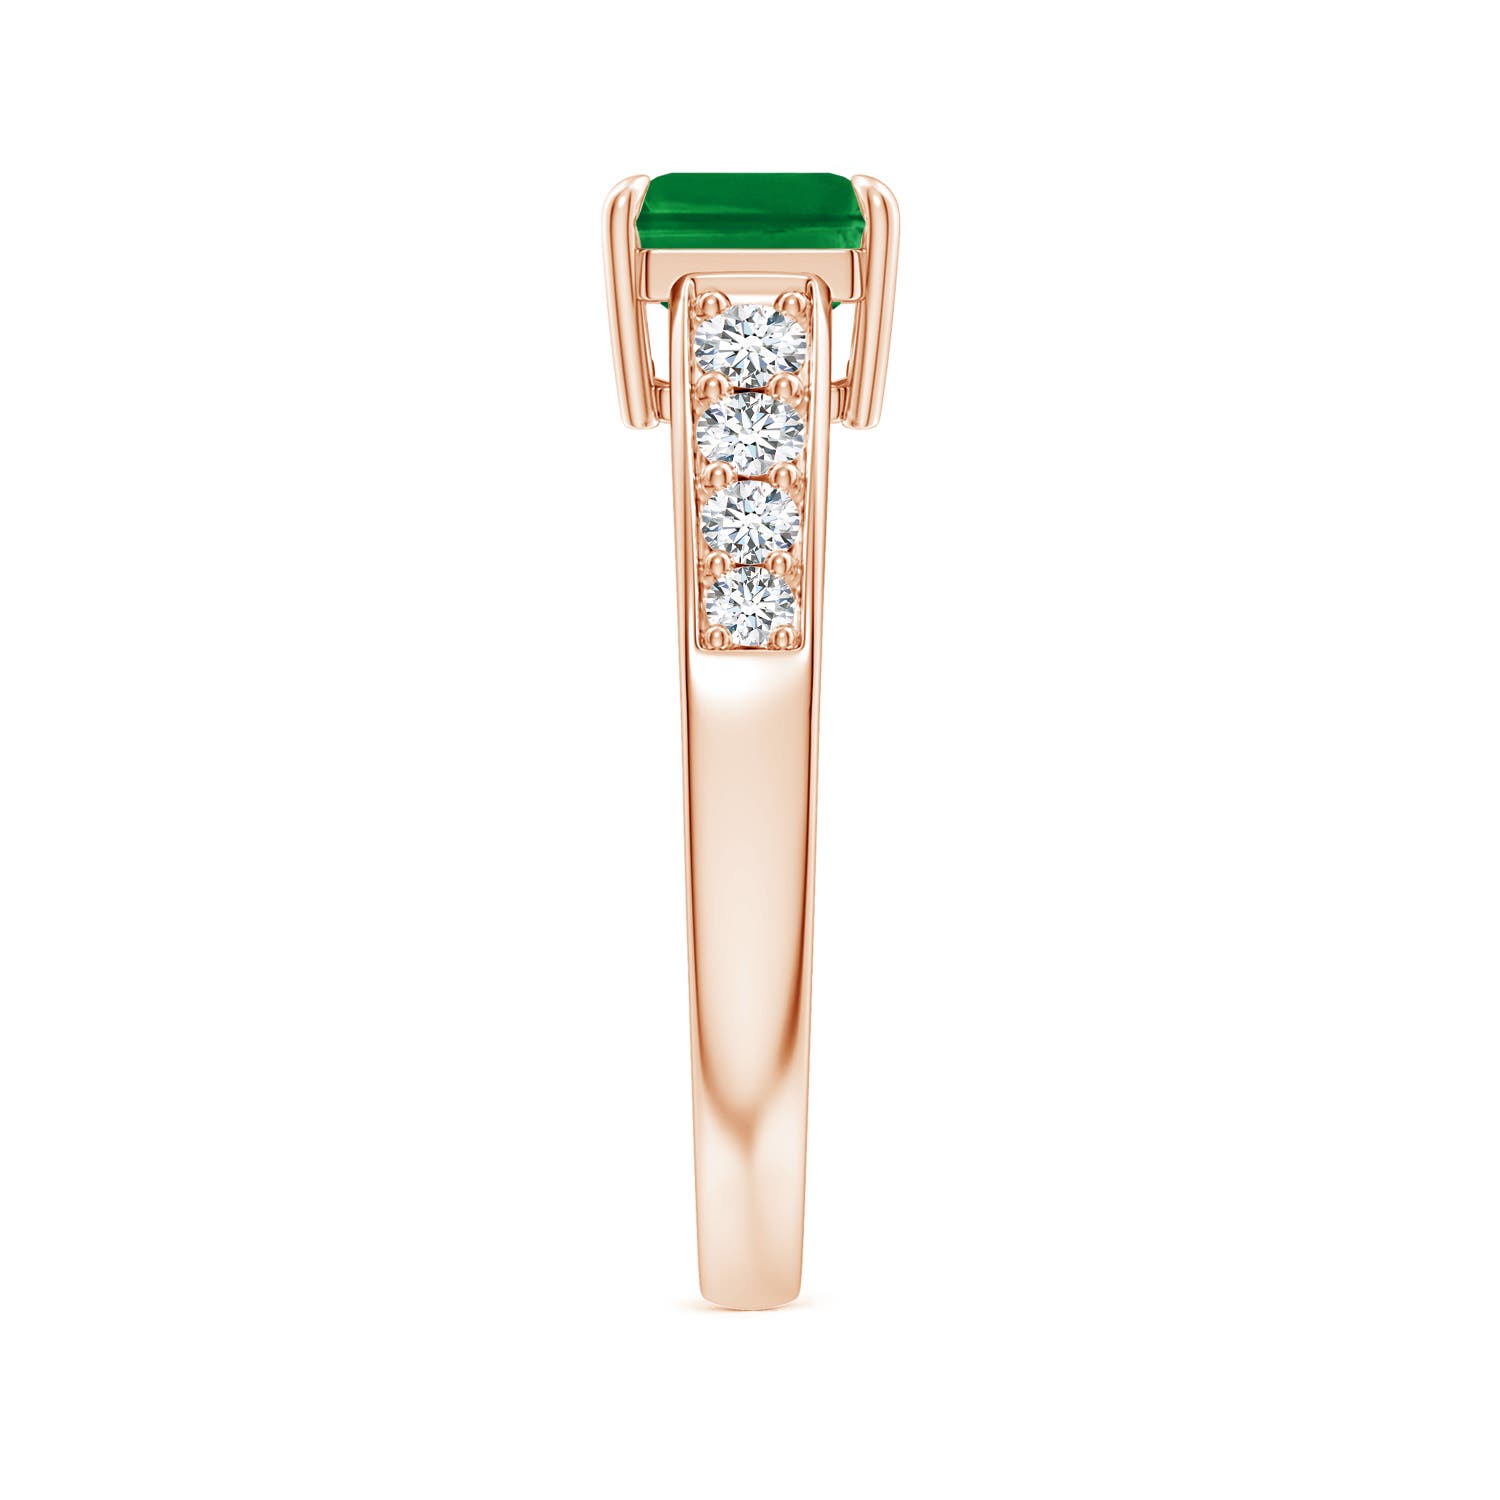 AAA - Emerald / 1.82 CT / 14 KT Rose Gold